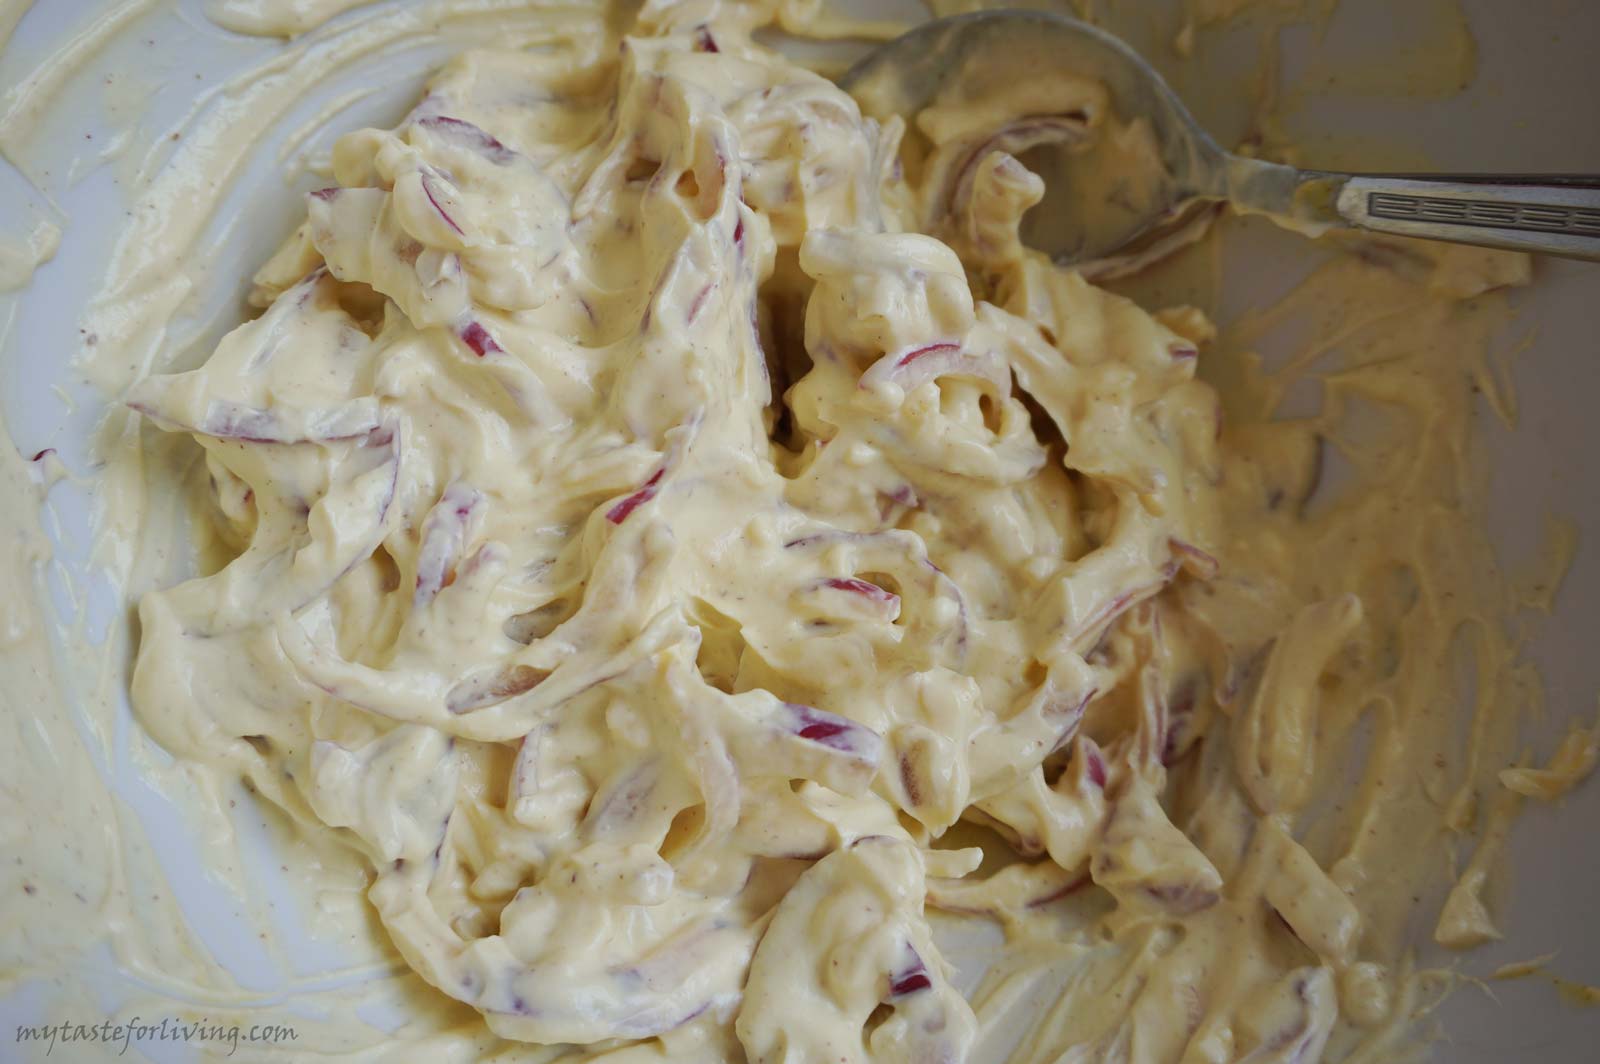 I offer you an easy and delicious recipe for potato salad with skyr, mustard and red onion. Skyr is an Icelandic dairy product, fat-free, but with much more protein.